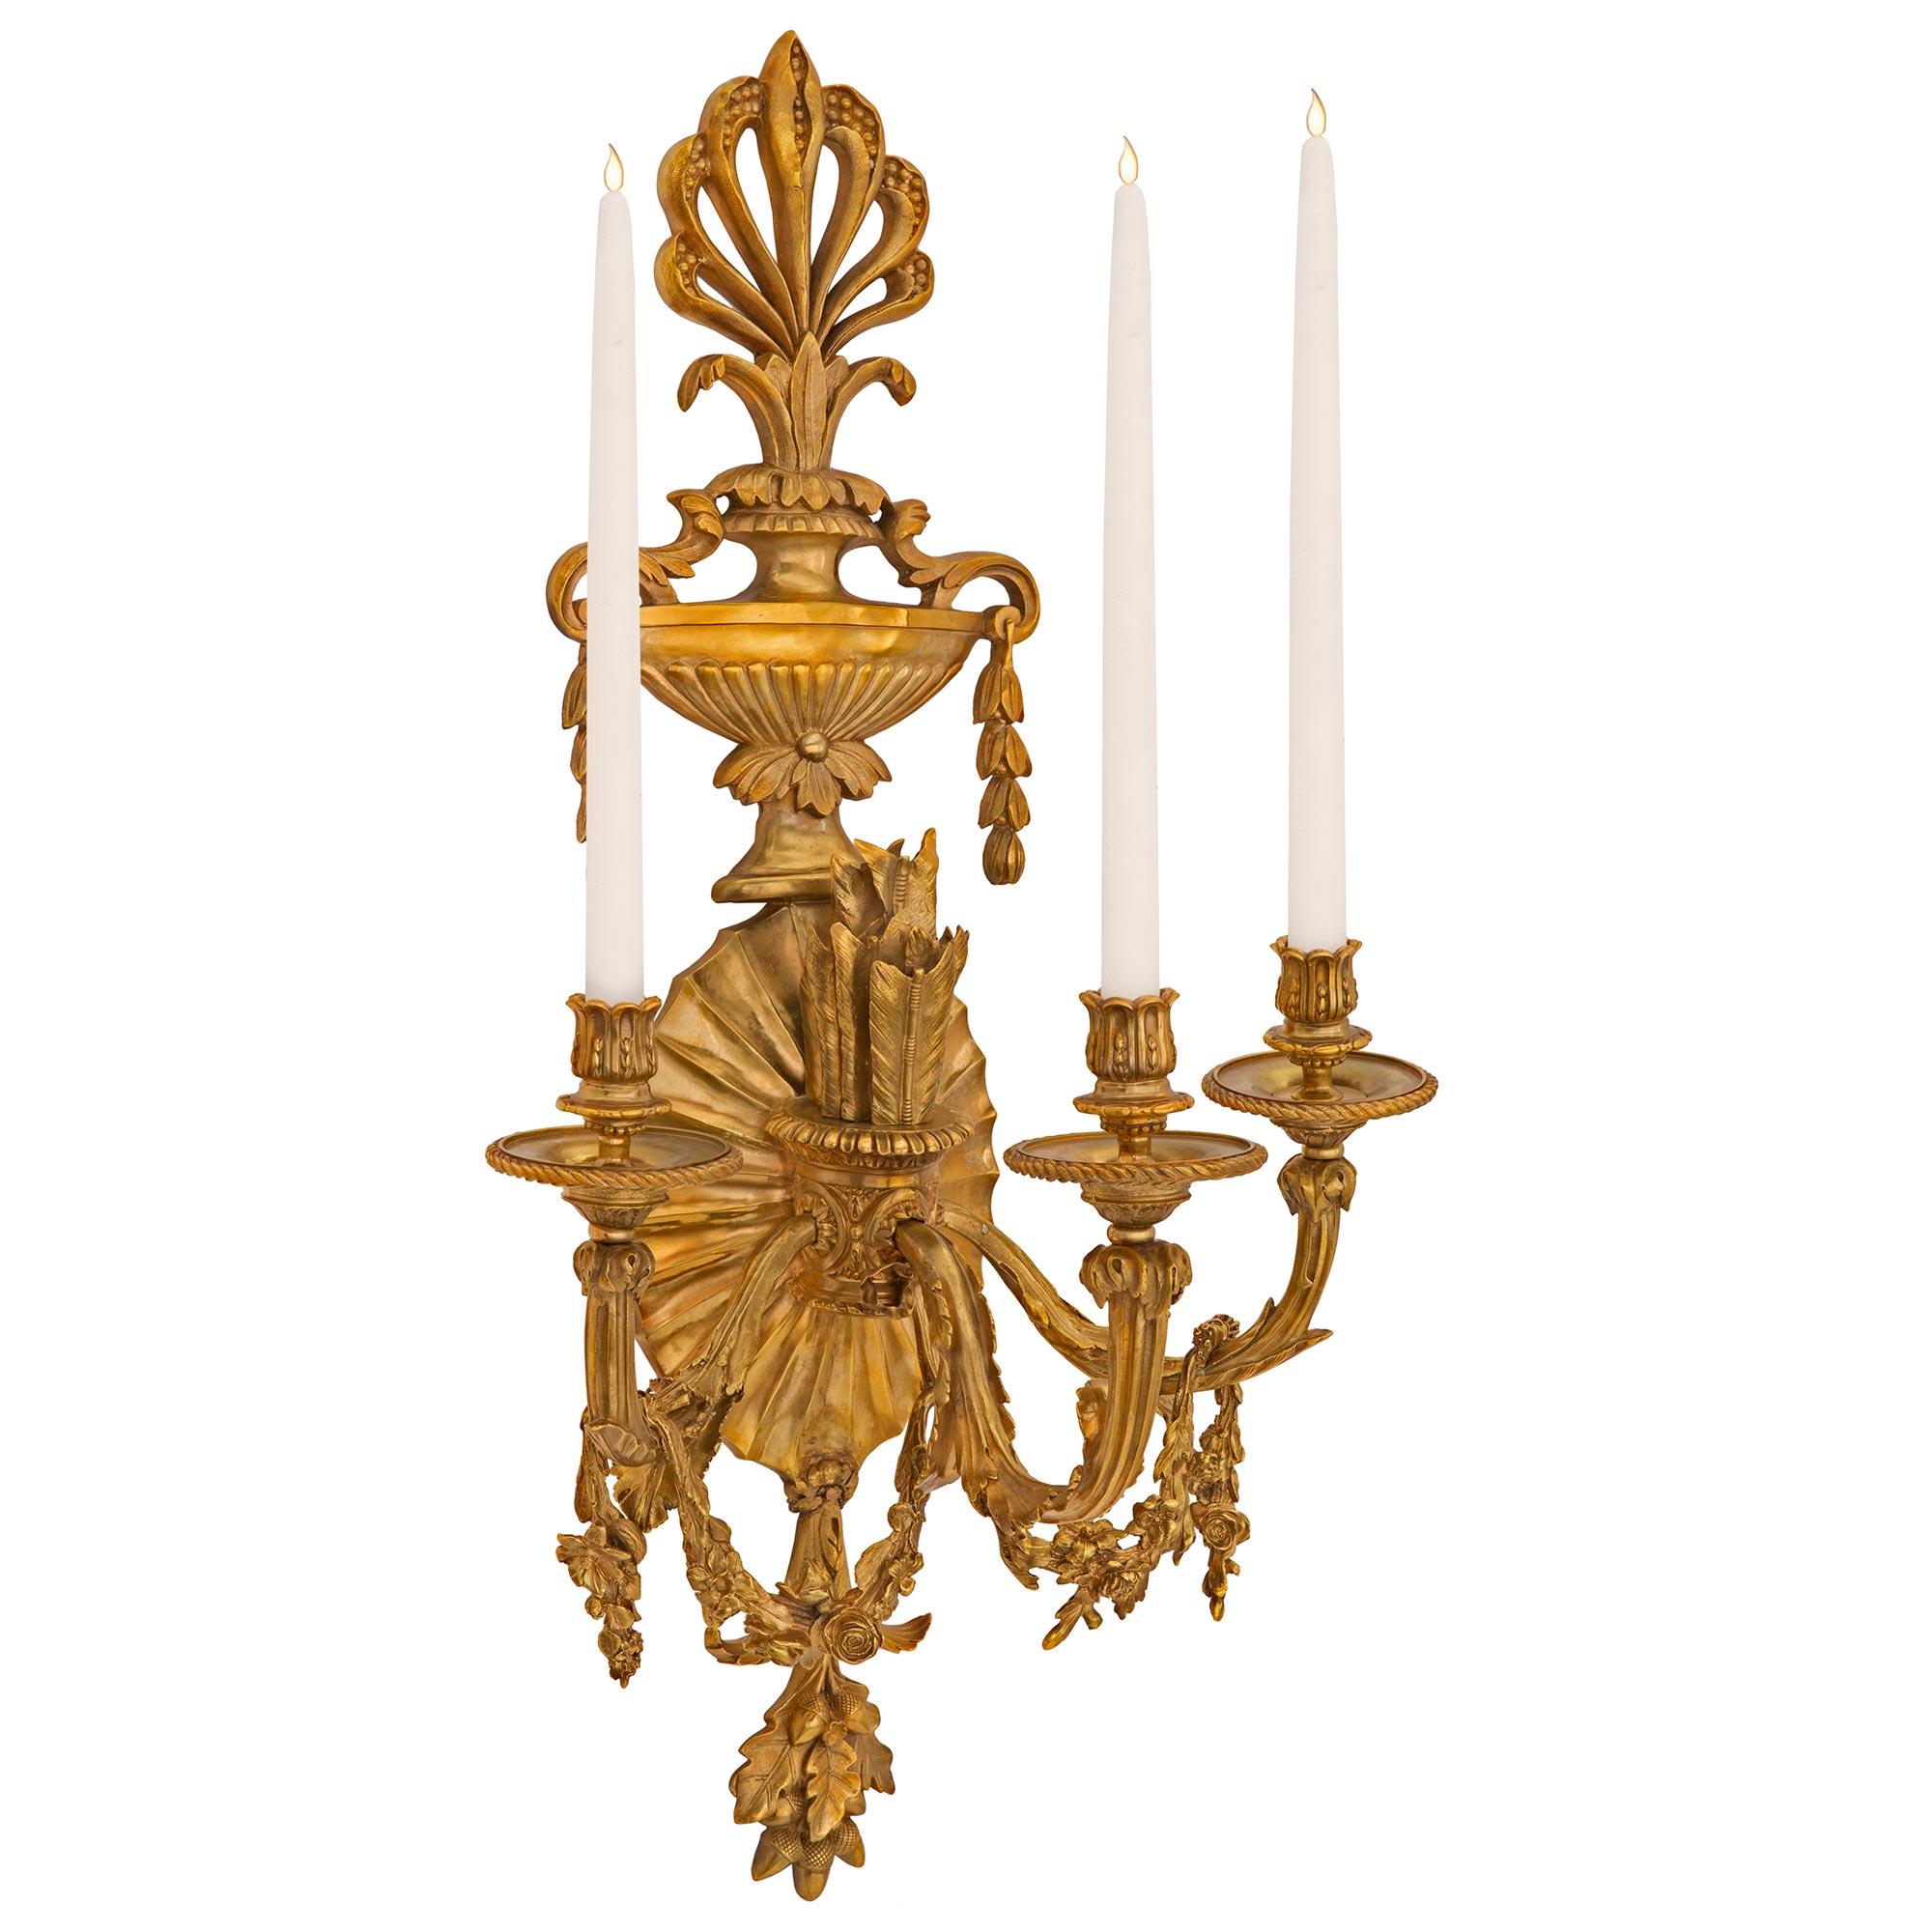 An impressive large scale pair of French 19th century Neo-Classical st. ormolu sconces. Each three arm sconce is centered by charming finely detailed oak leaves and acorns below the beautiful reeded sunburst designed backplate. The elegantly curved